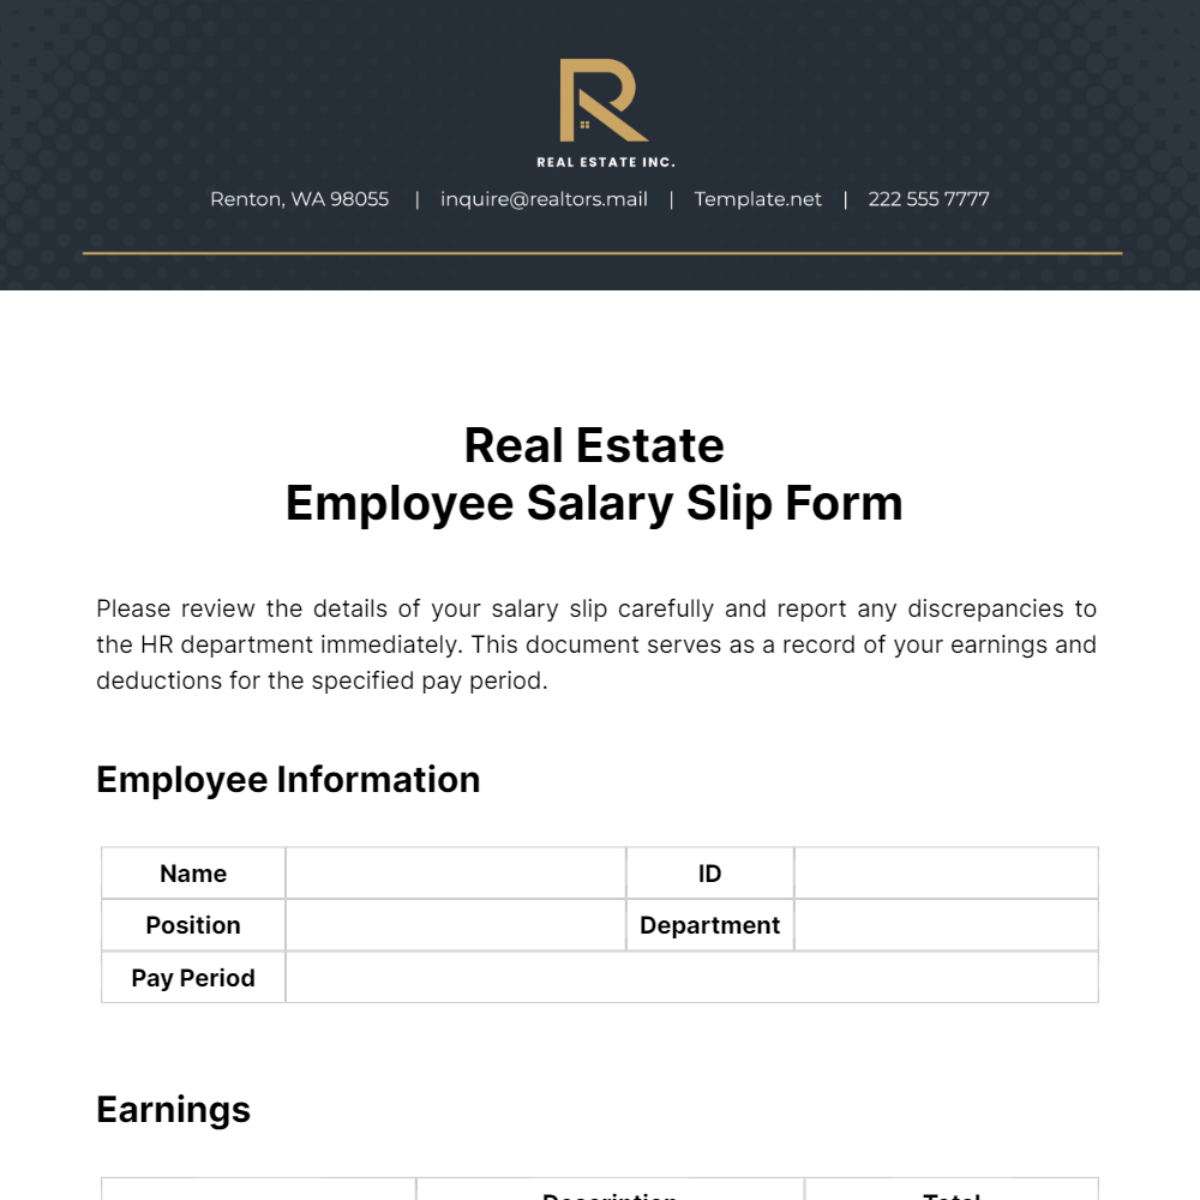 Real Estate Employee Salary Slip Form Template